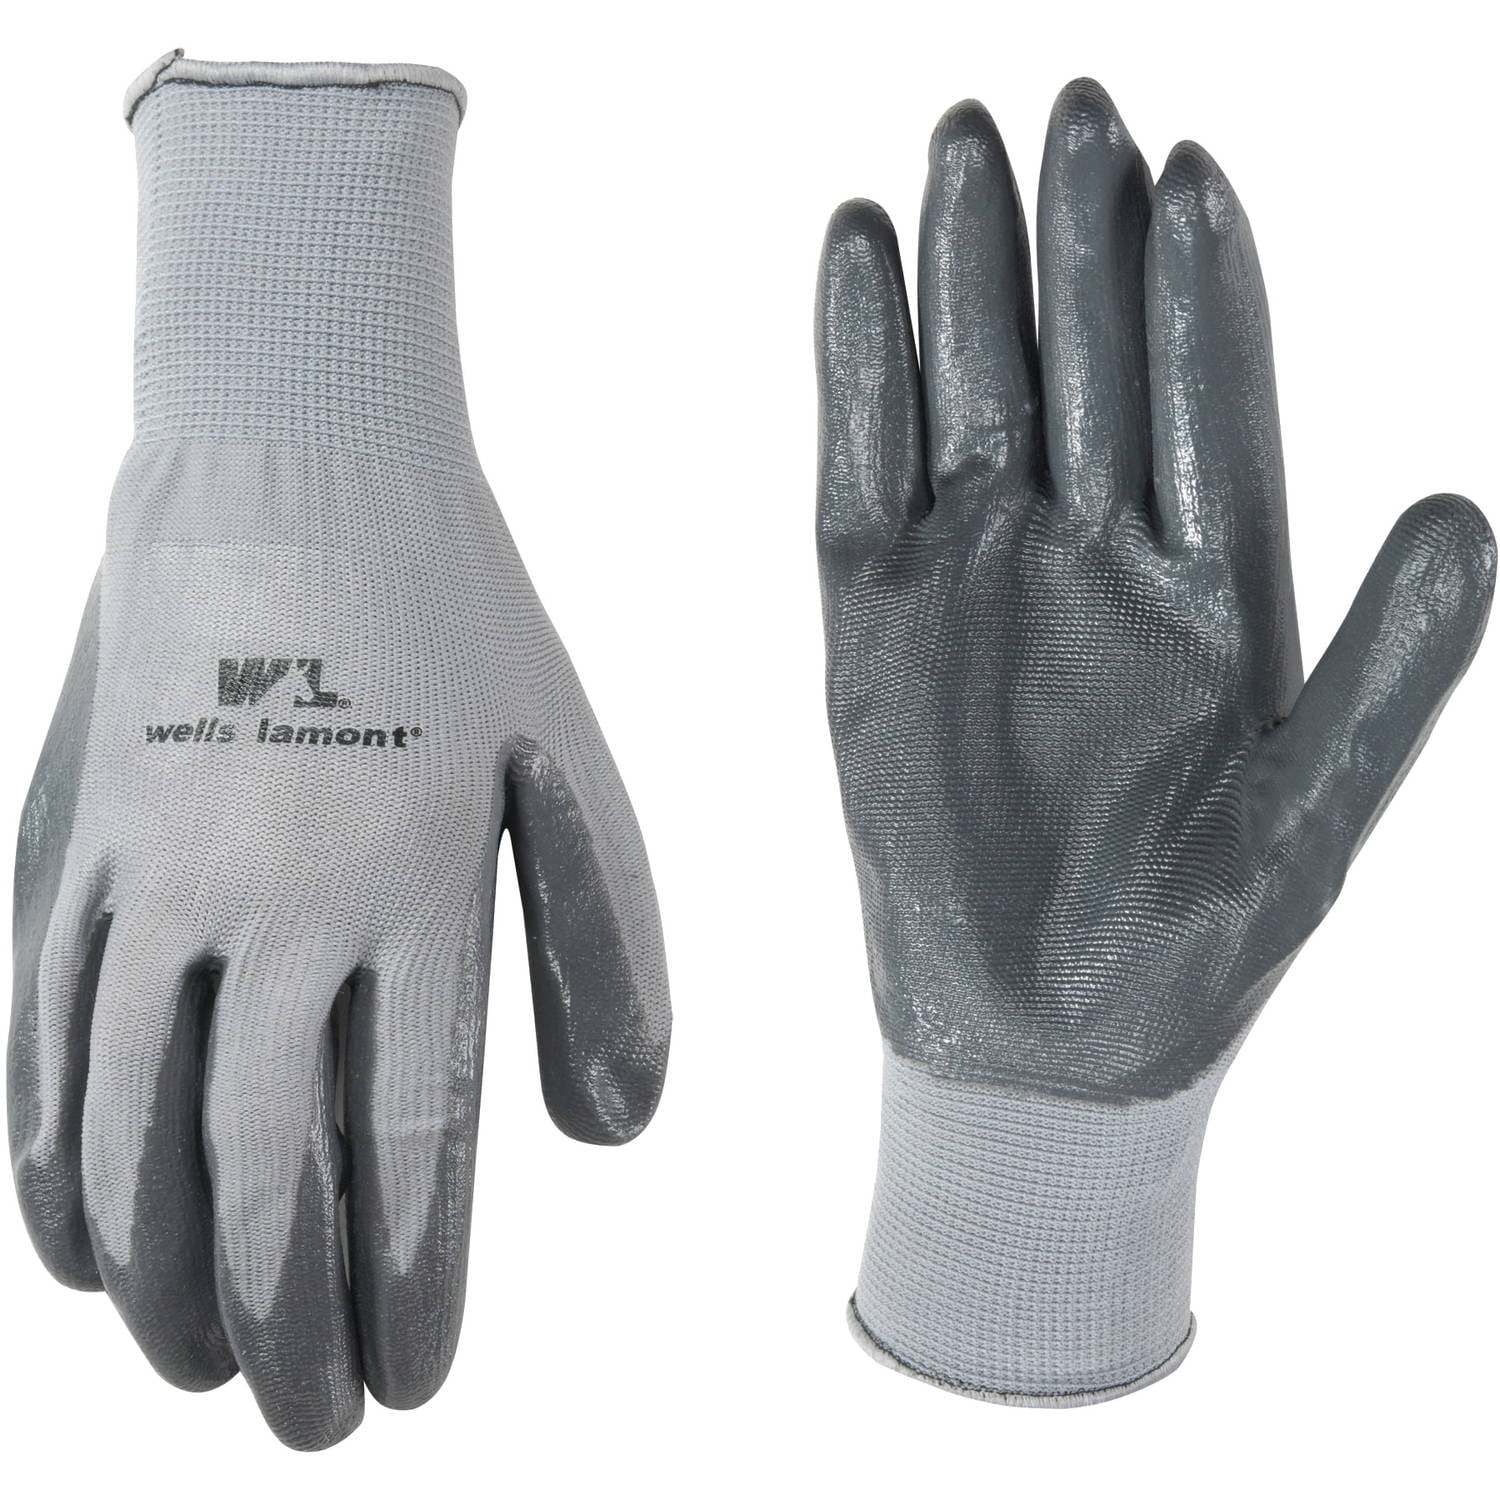 Details about   Wells Lamont Cold Weather All Purpose Fleece Lined Nitrate Coated Gloves size L